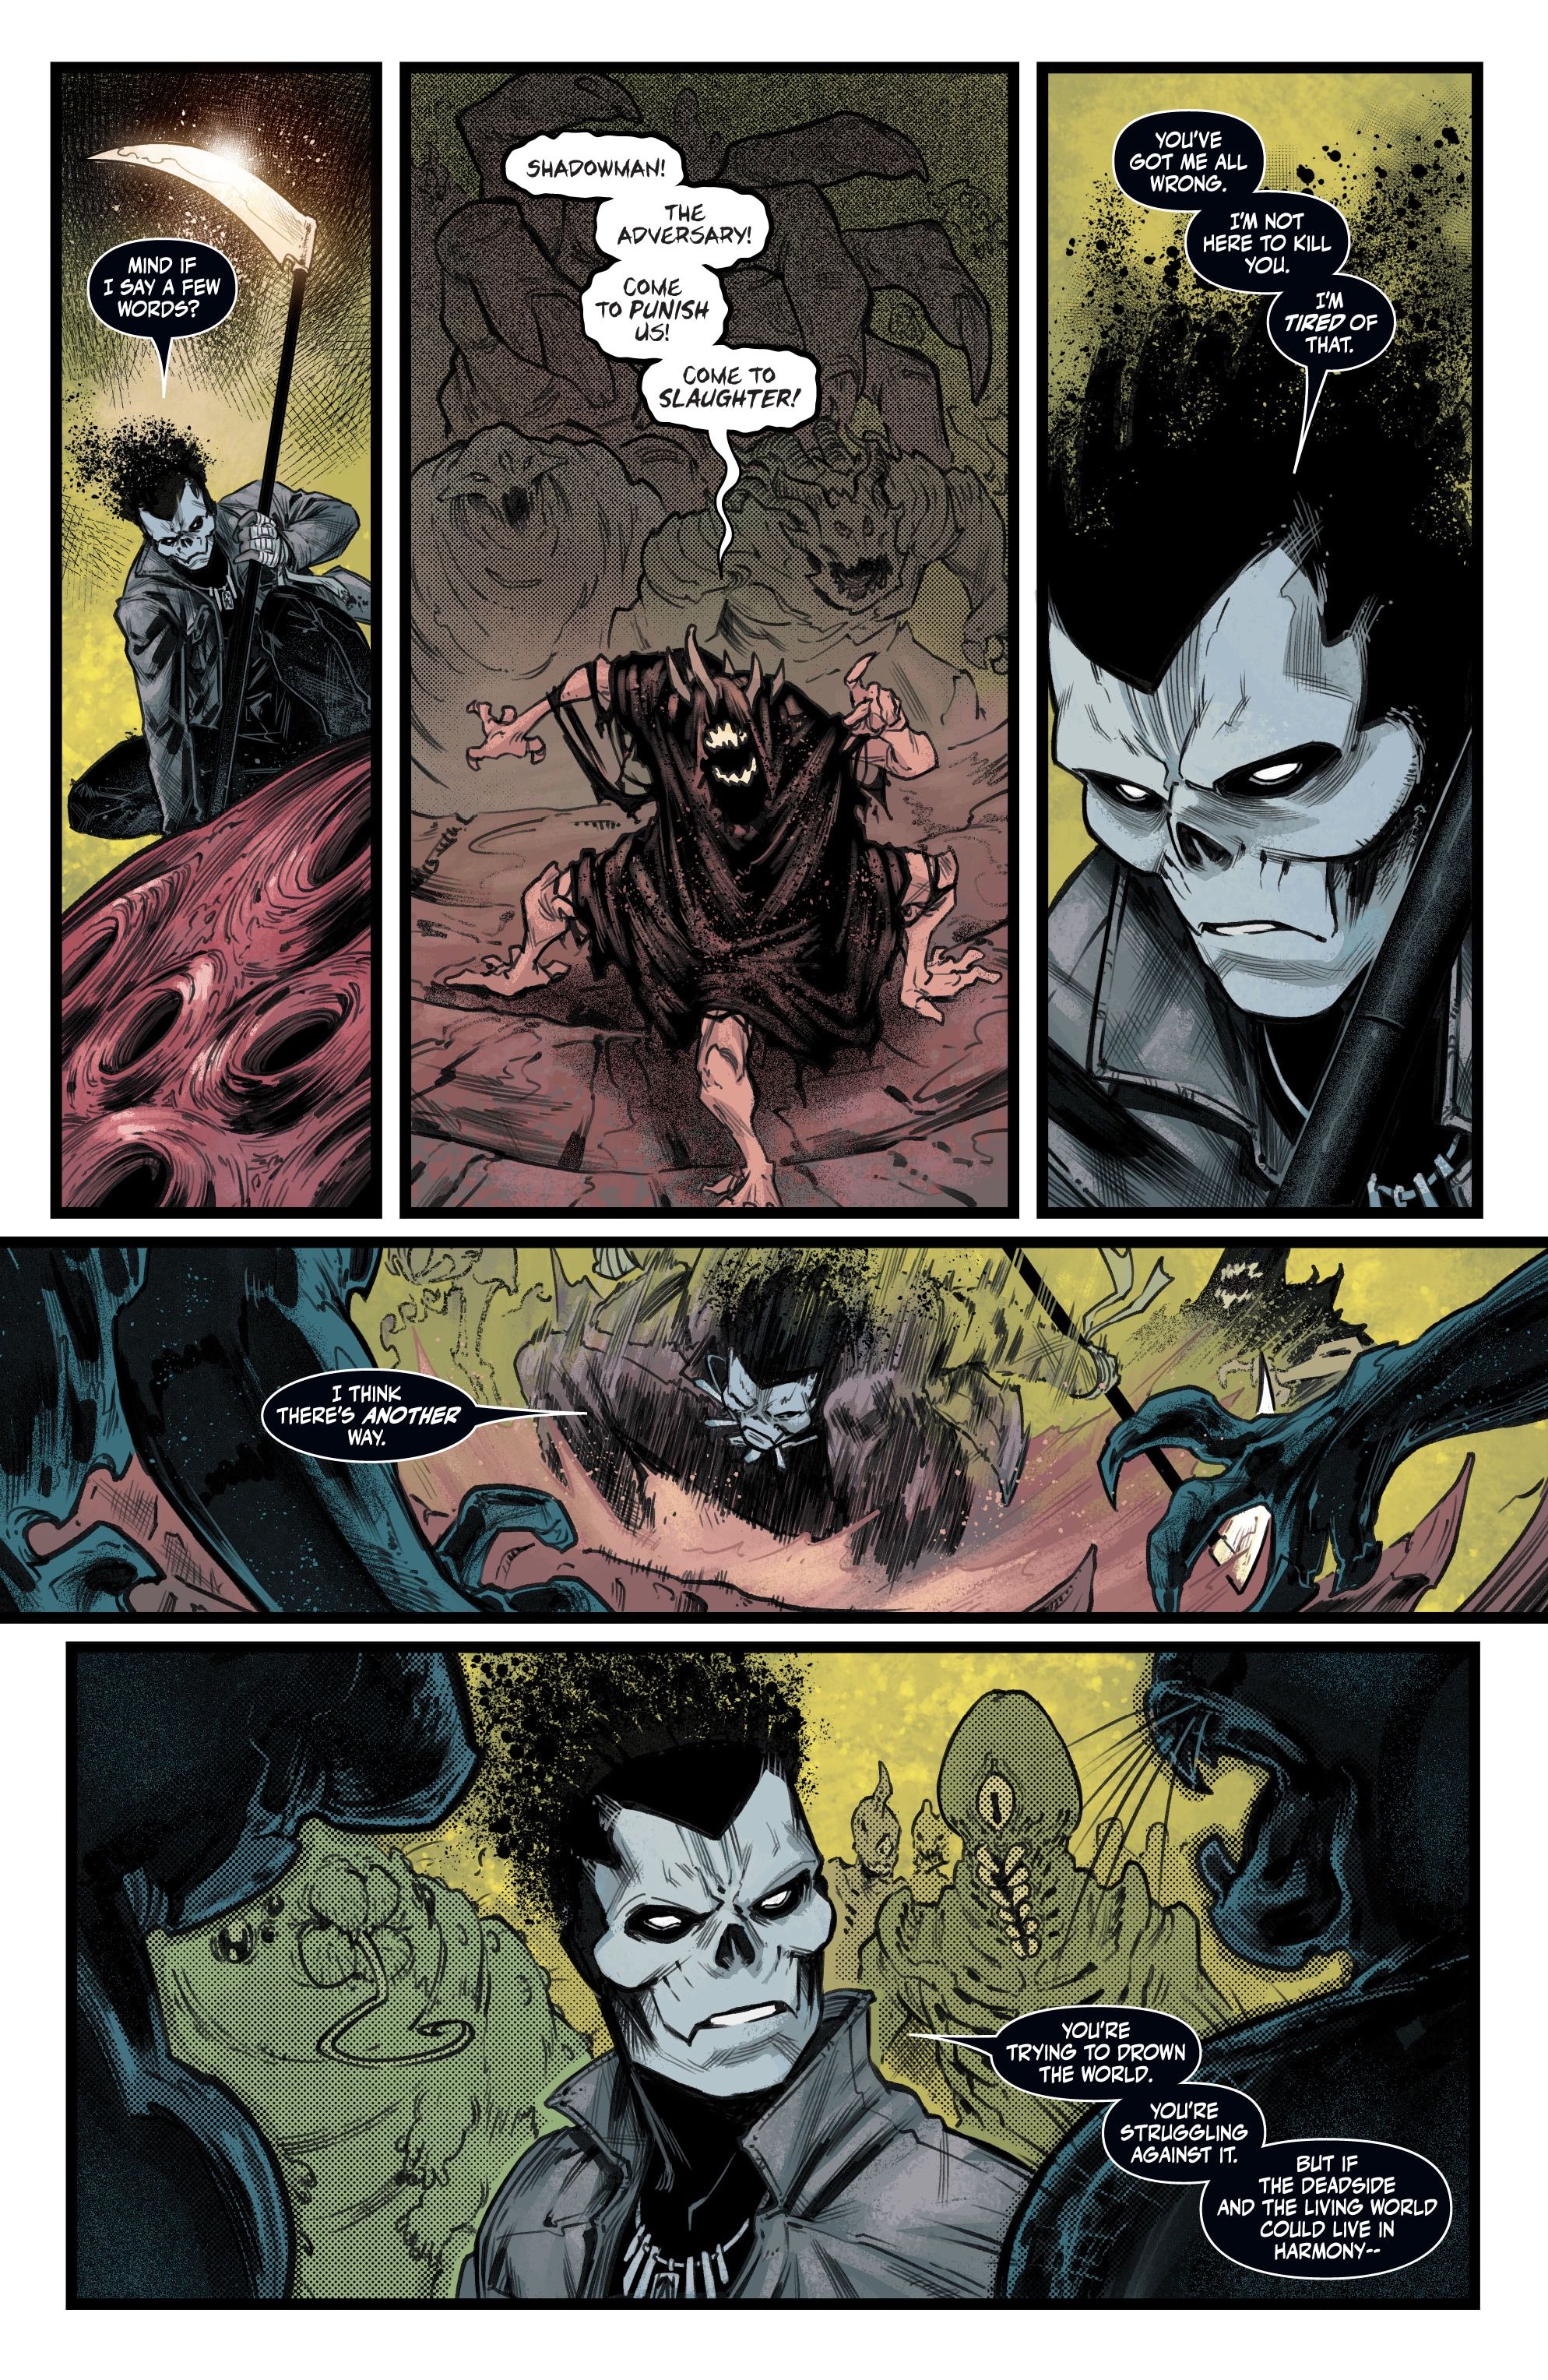 Shadowman 5 page, where he discusses trying to bring peace between the worlds of the living and the dead